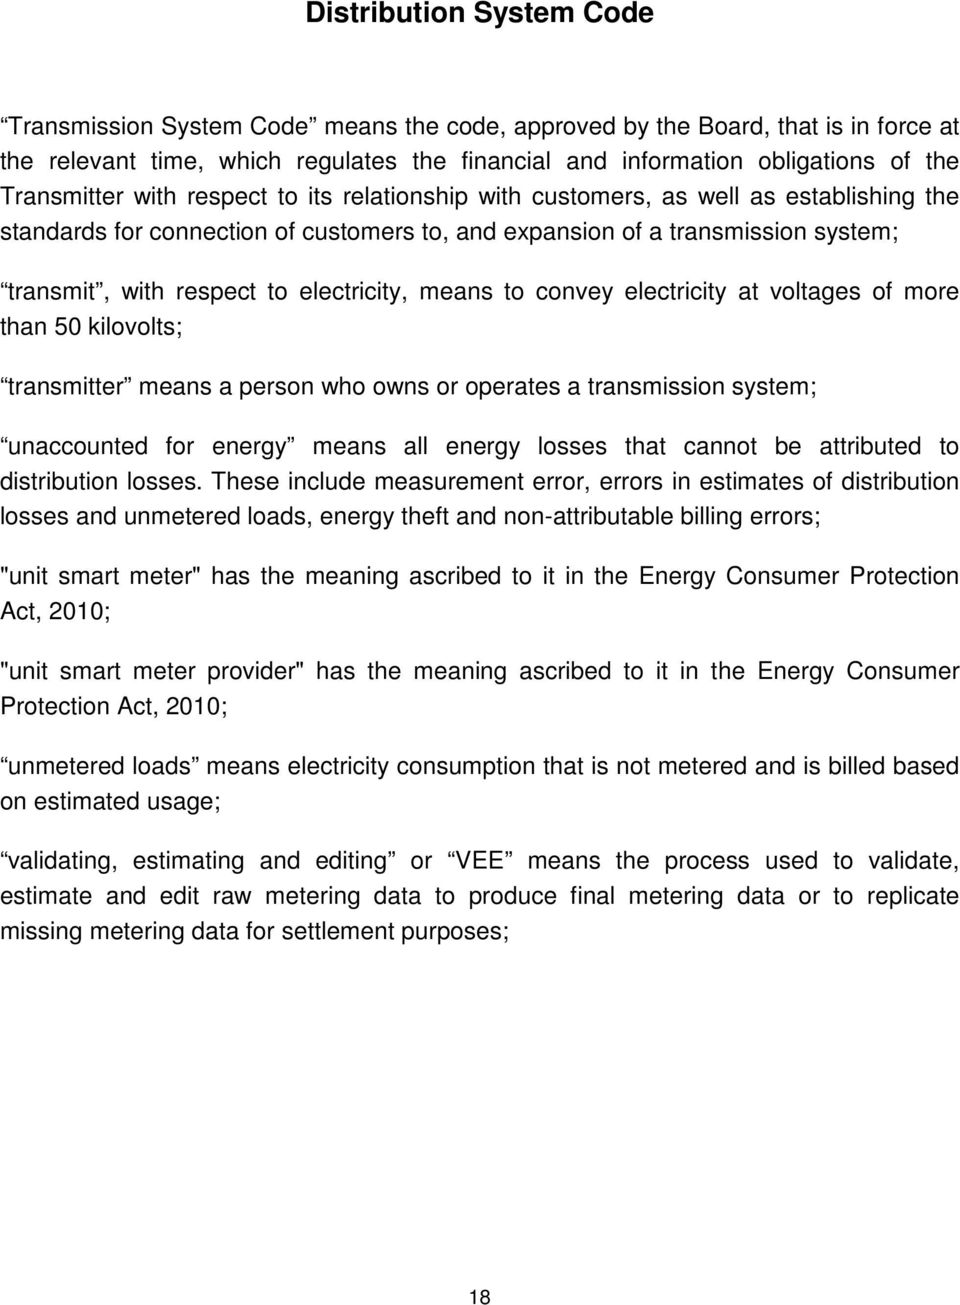 electricity at voltages of more than 50 kilovolts; transmitter means a person who owns or operates a transmission system; unaccounted for energy means all energy losses that cannot be attributed to